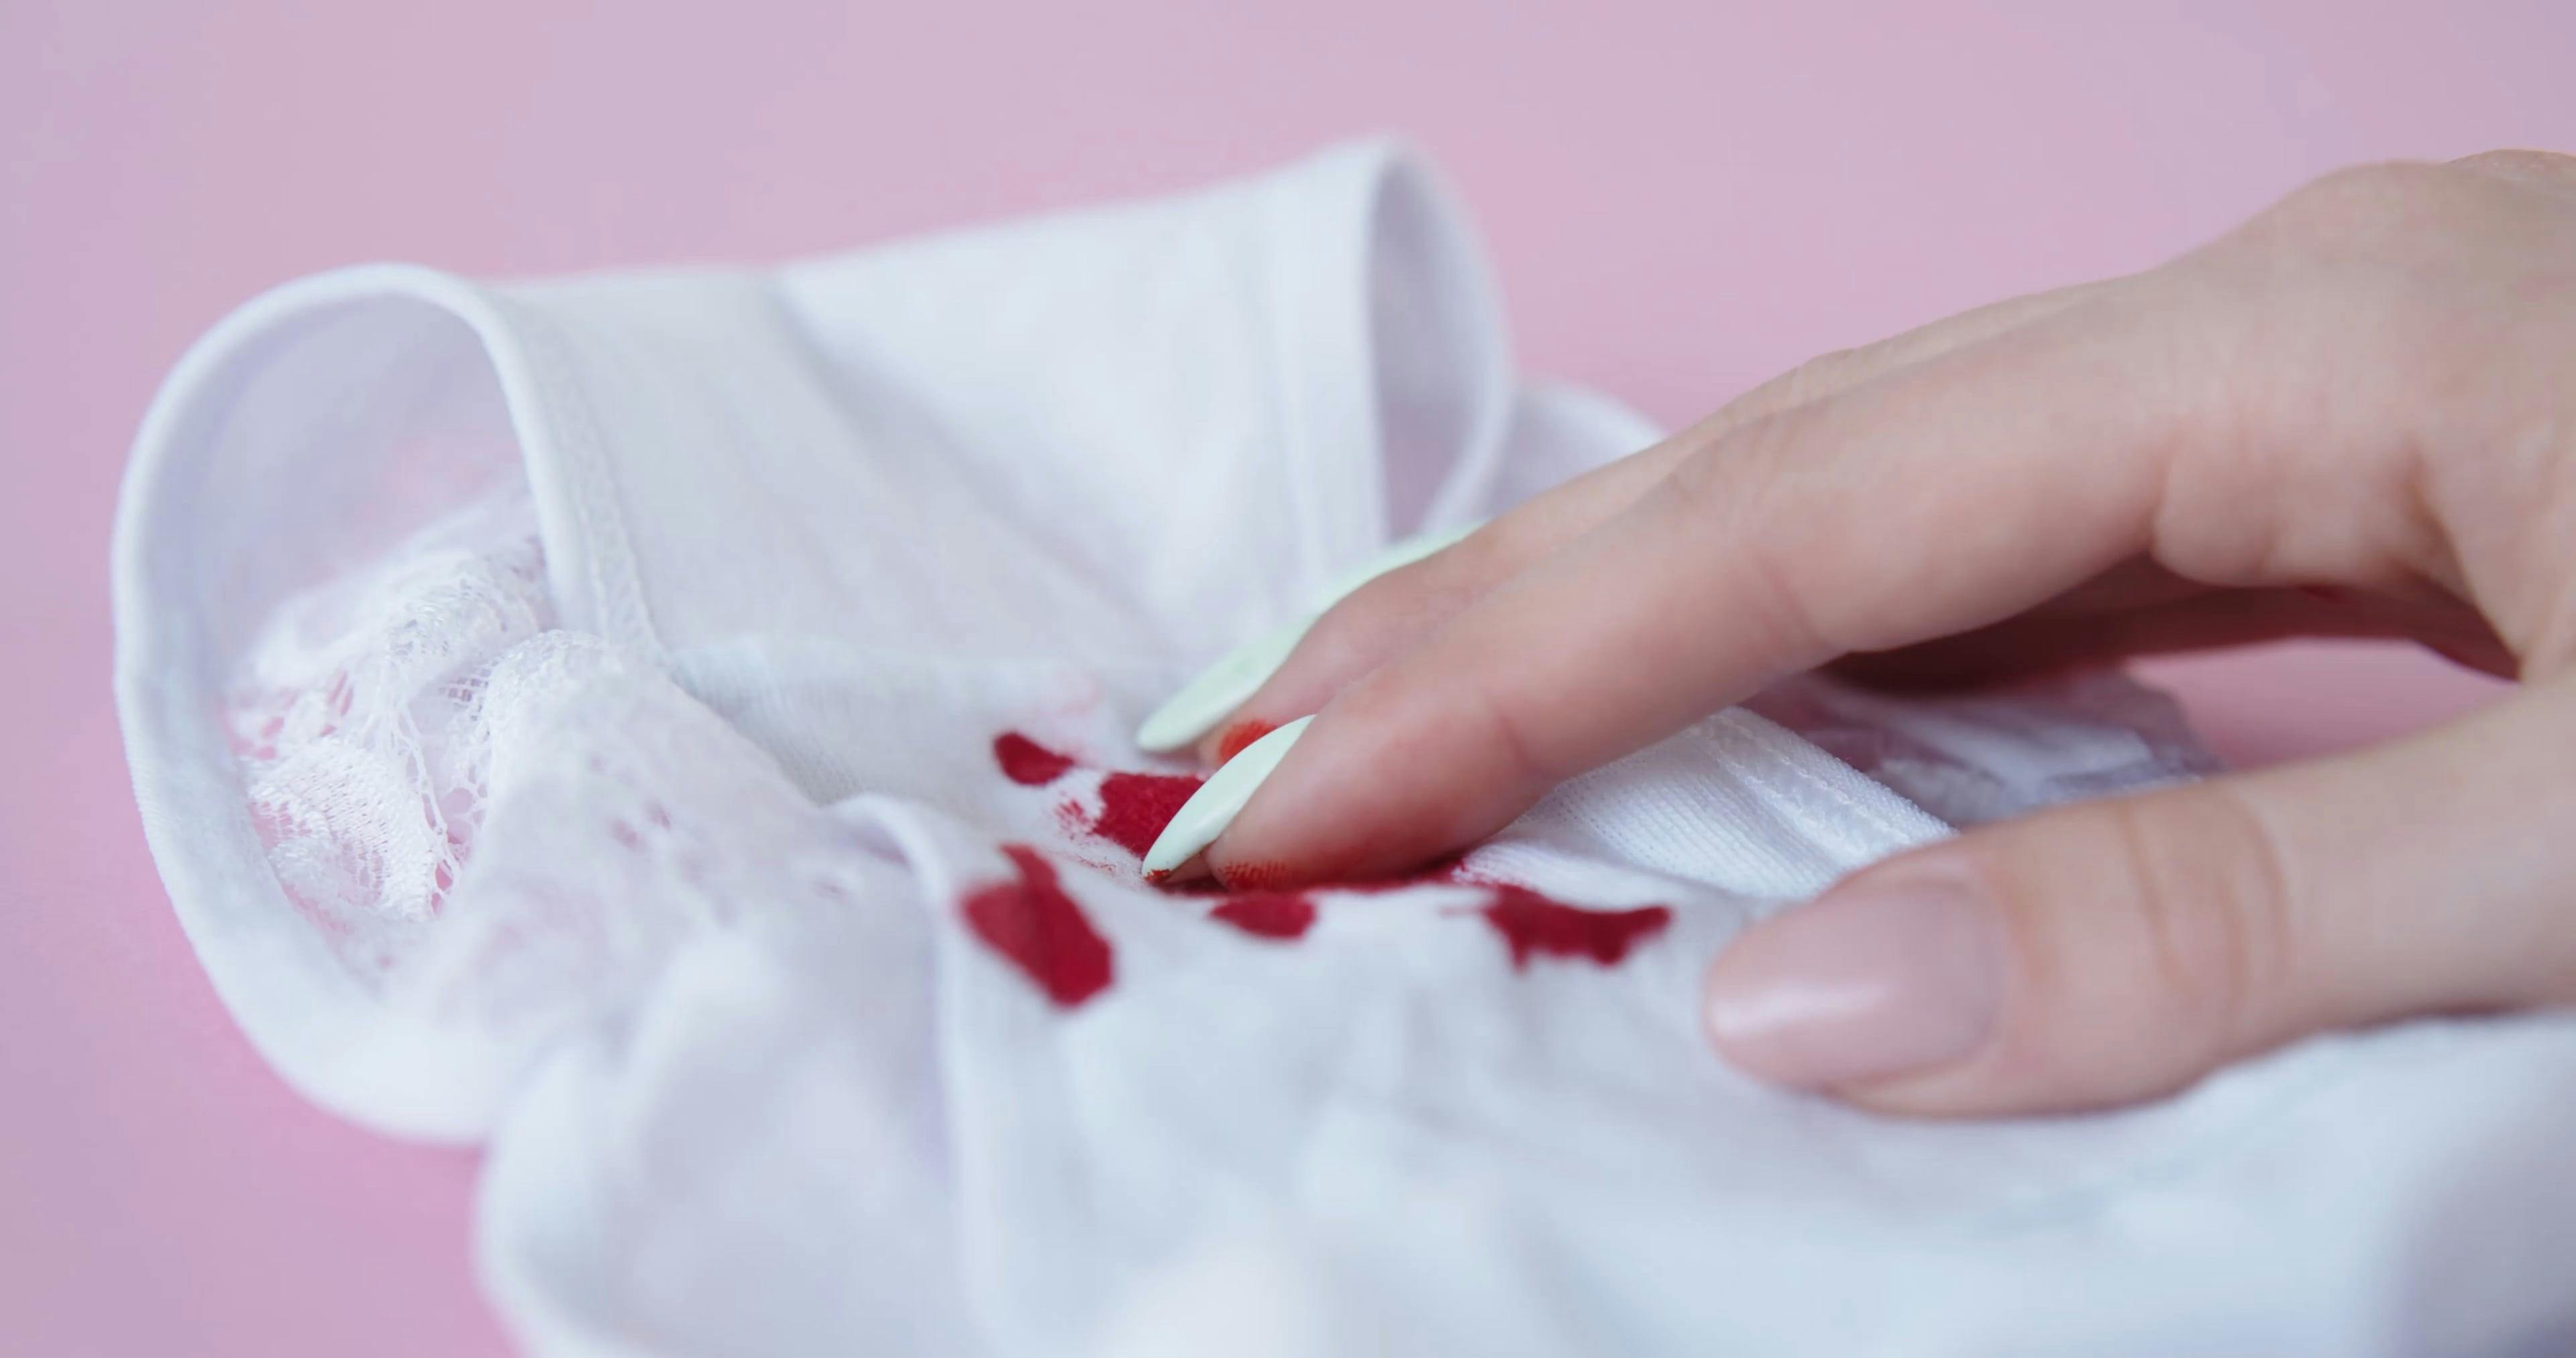 Blood on Underwear and Person's Hand · Free Stock Video